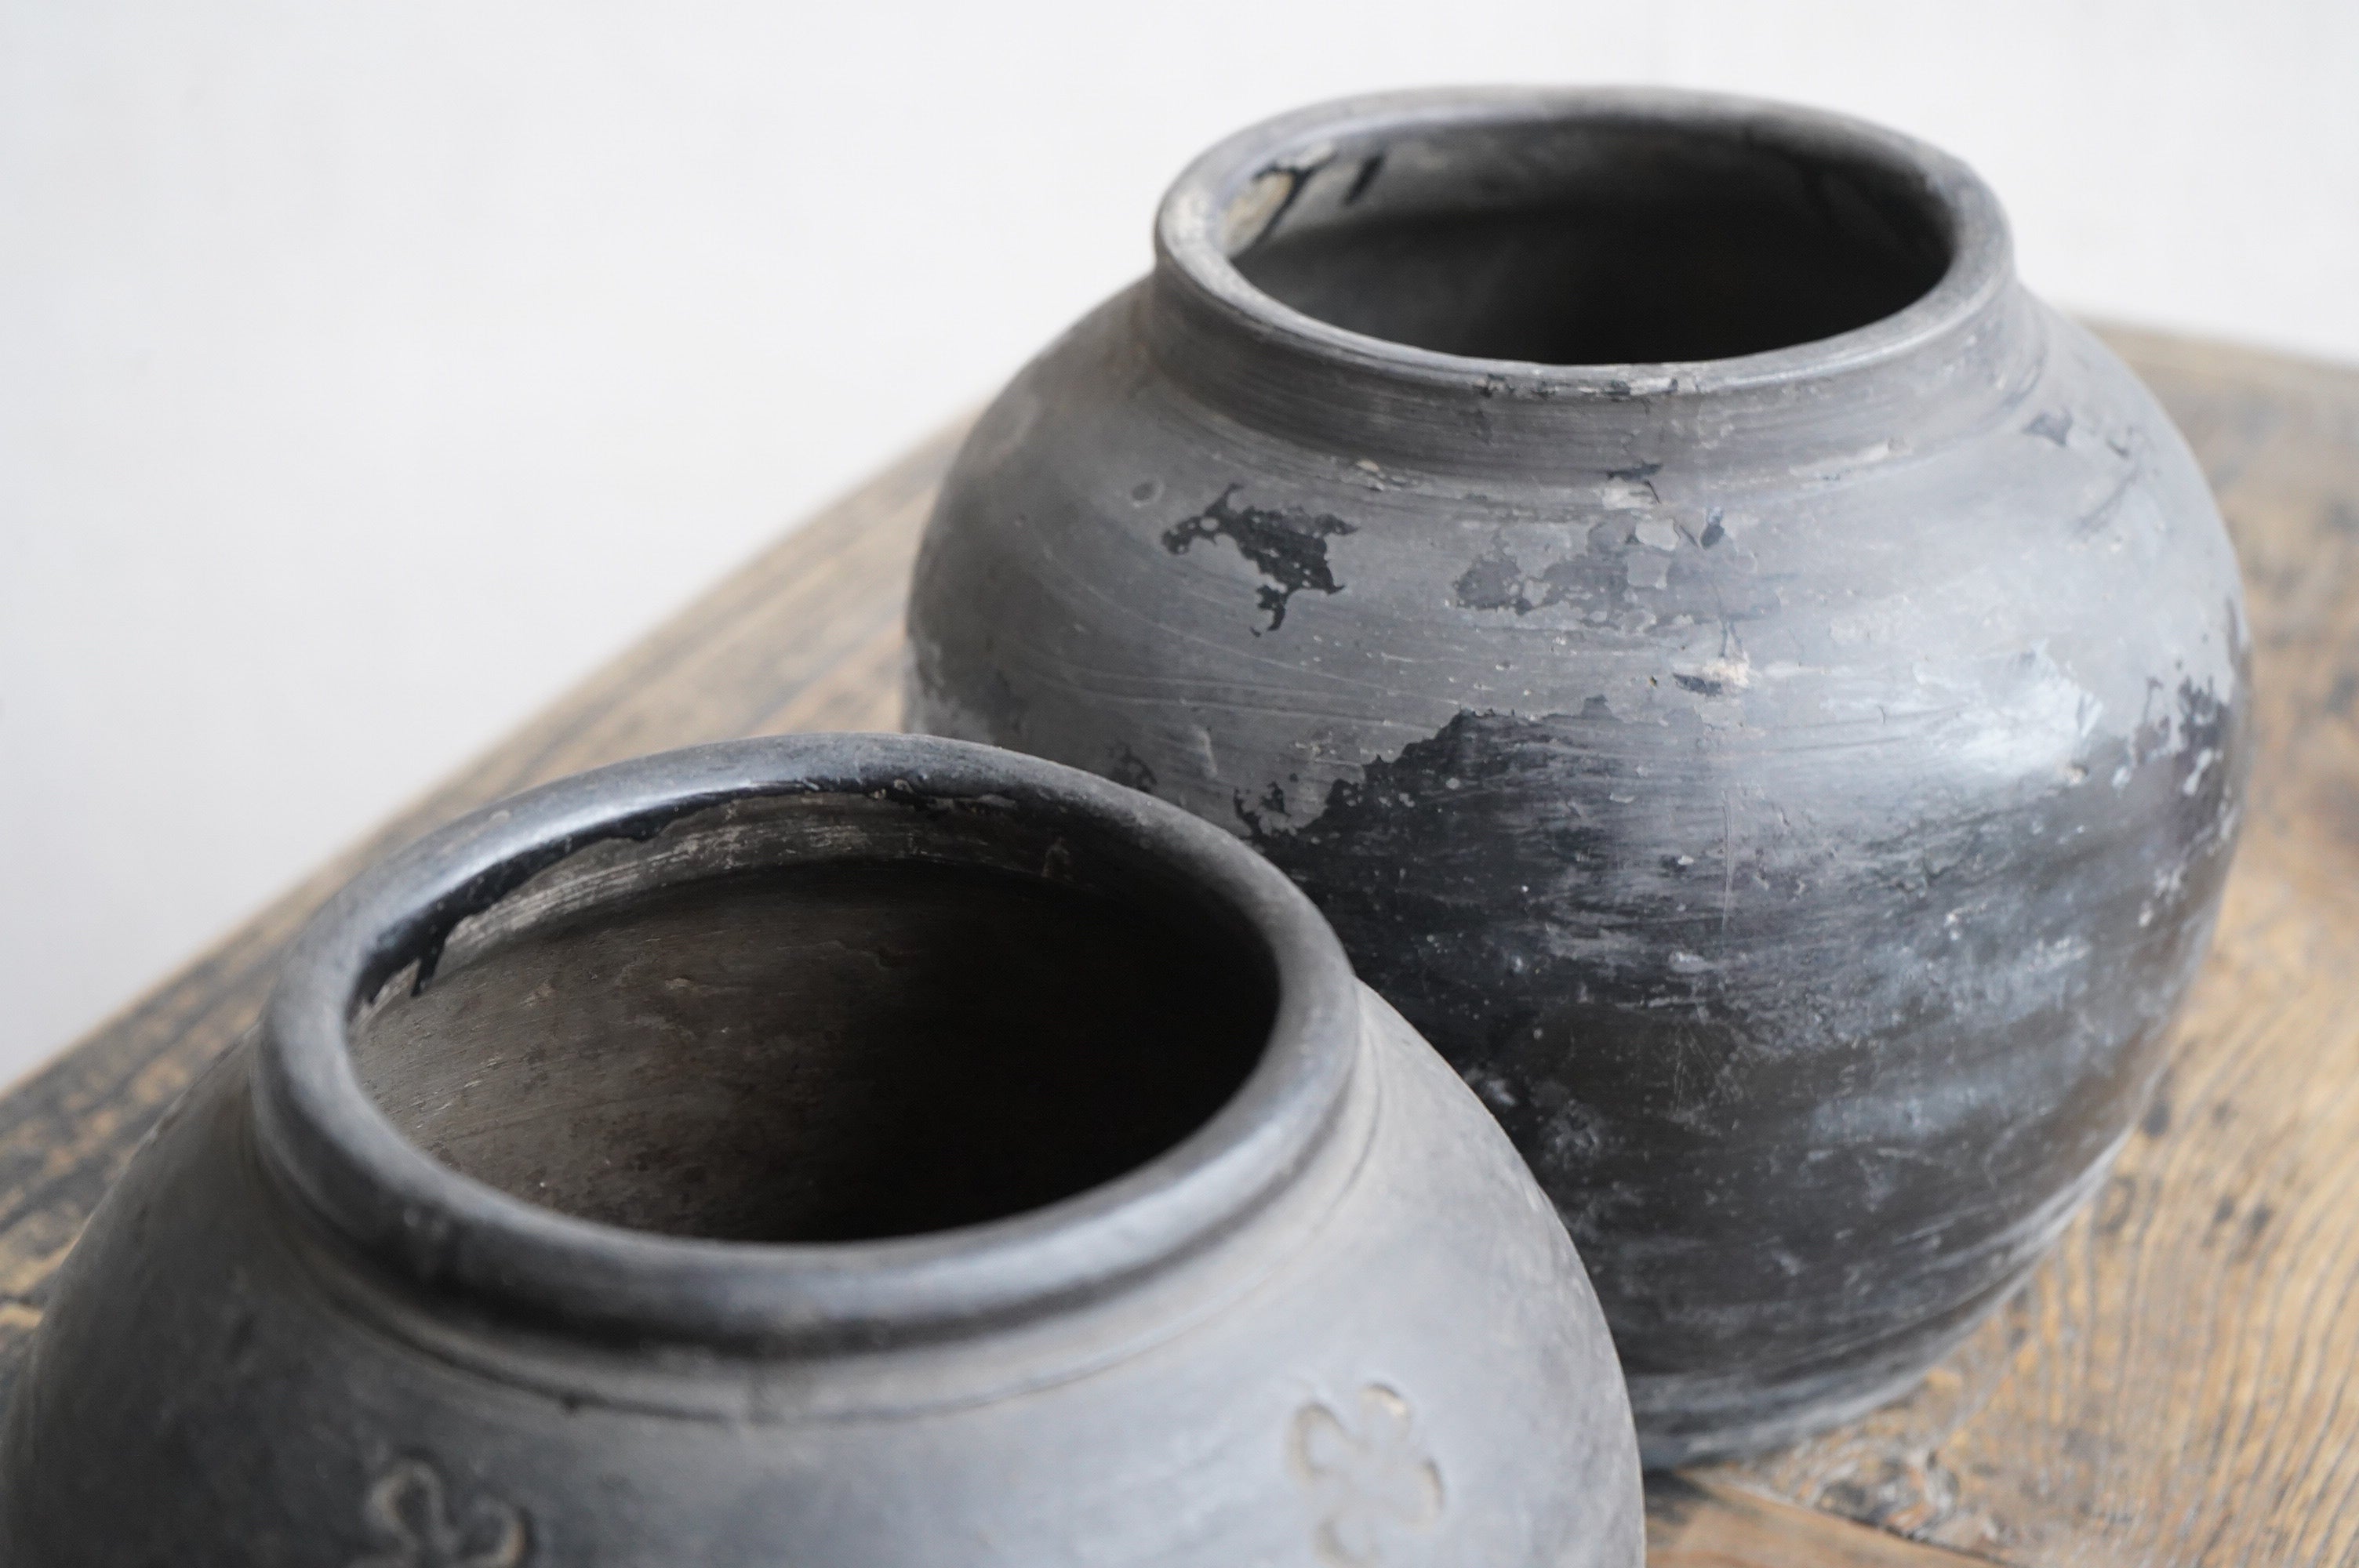 Pair of Chinese Preserve Pots